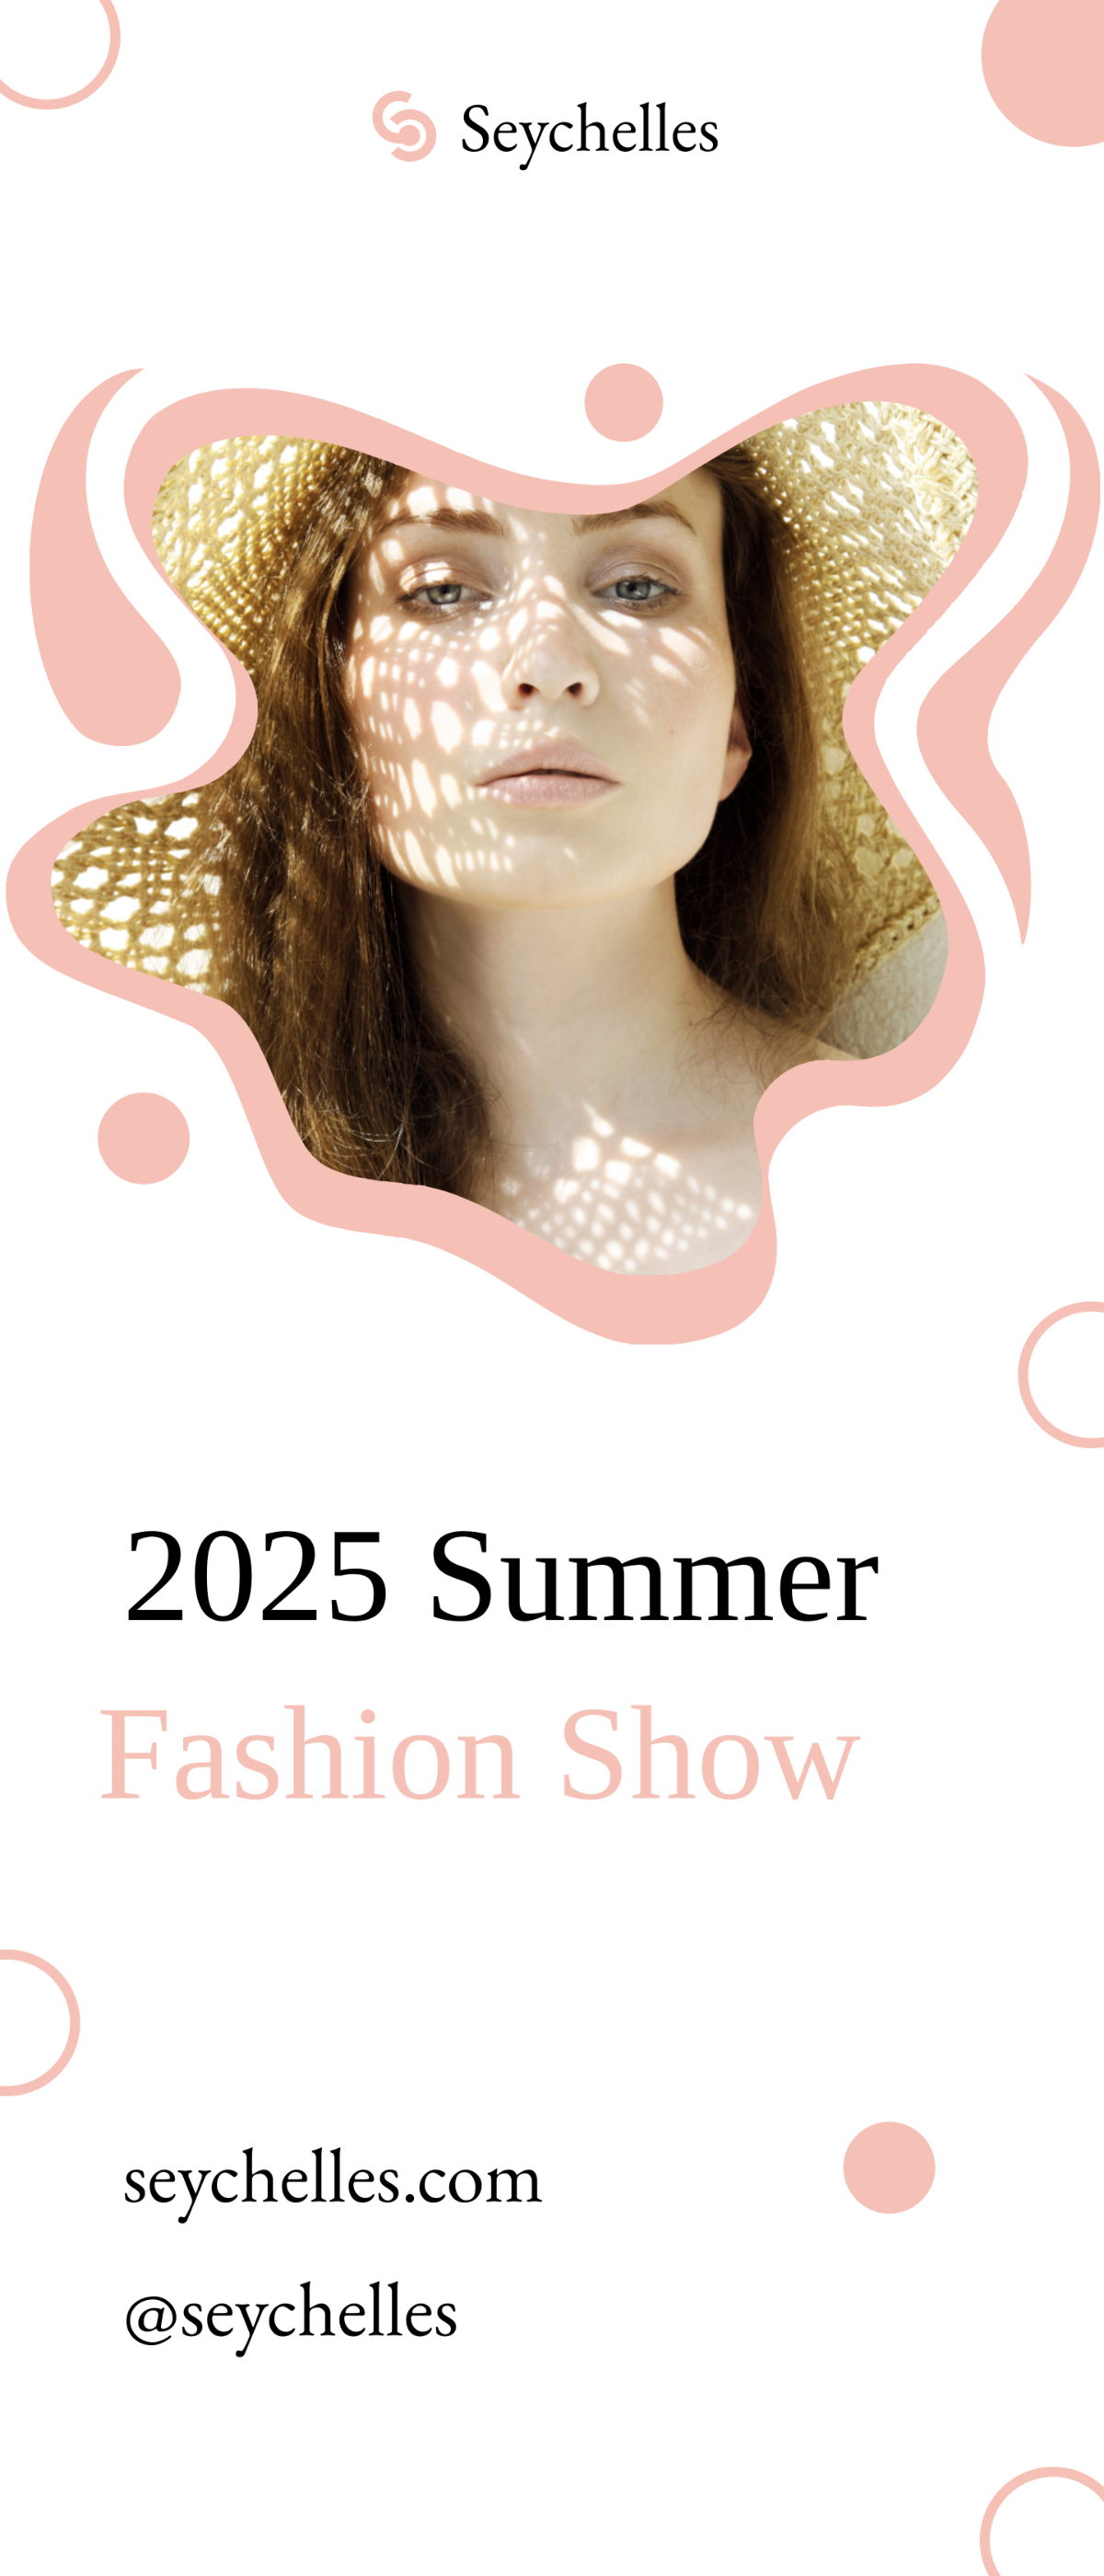 Free Fashion Show Roll-Up Banner Template